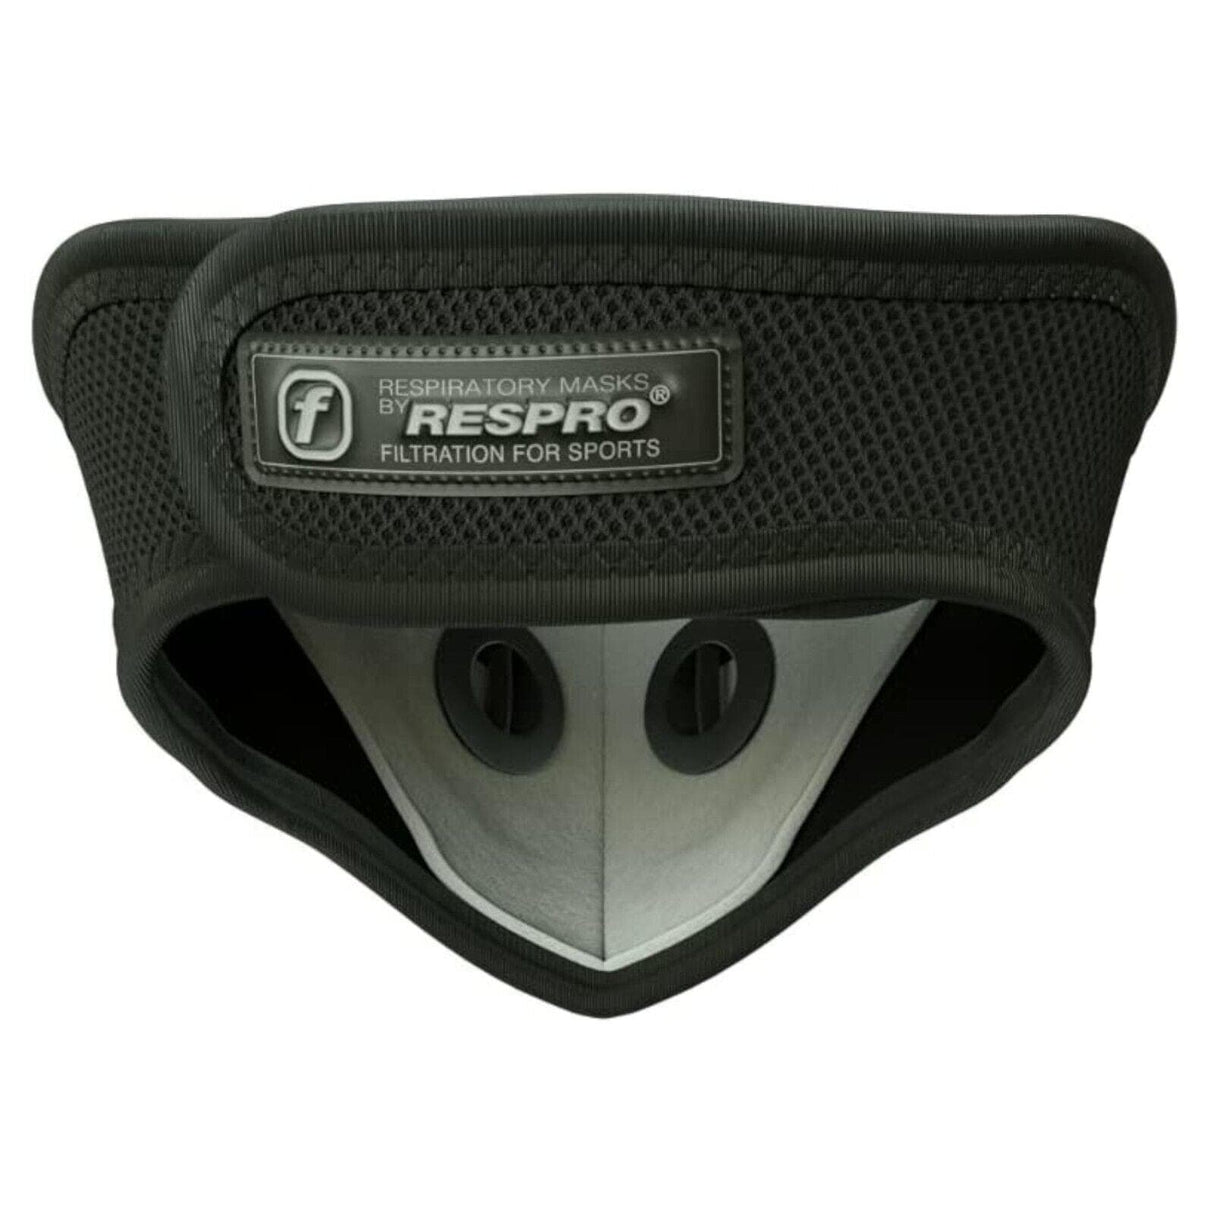 Respro Ultralight Mask with Powa Filter Valves - Black - Large